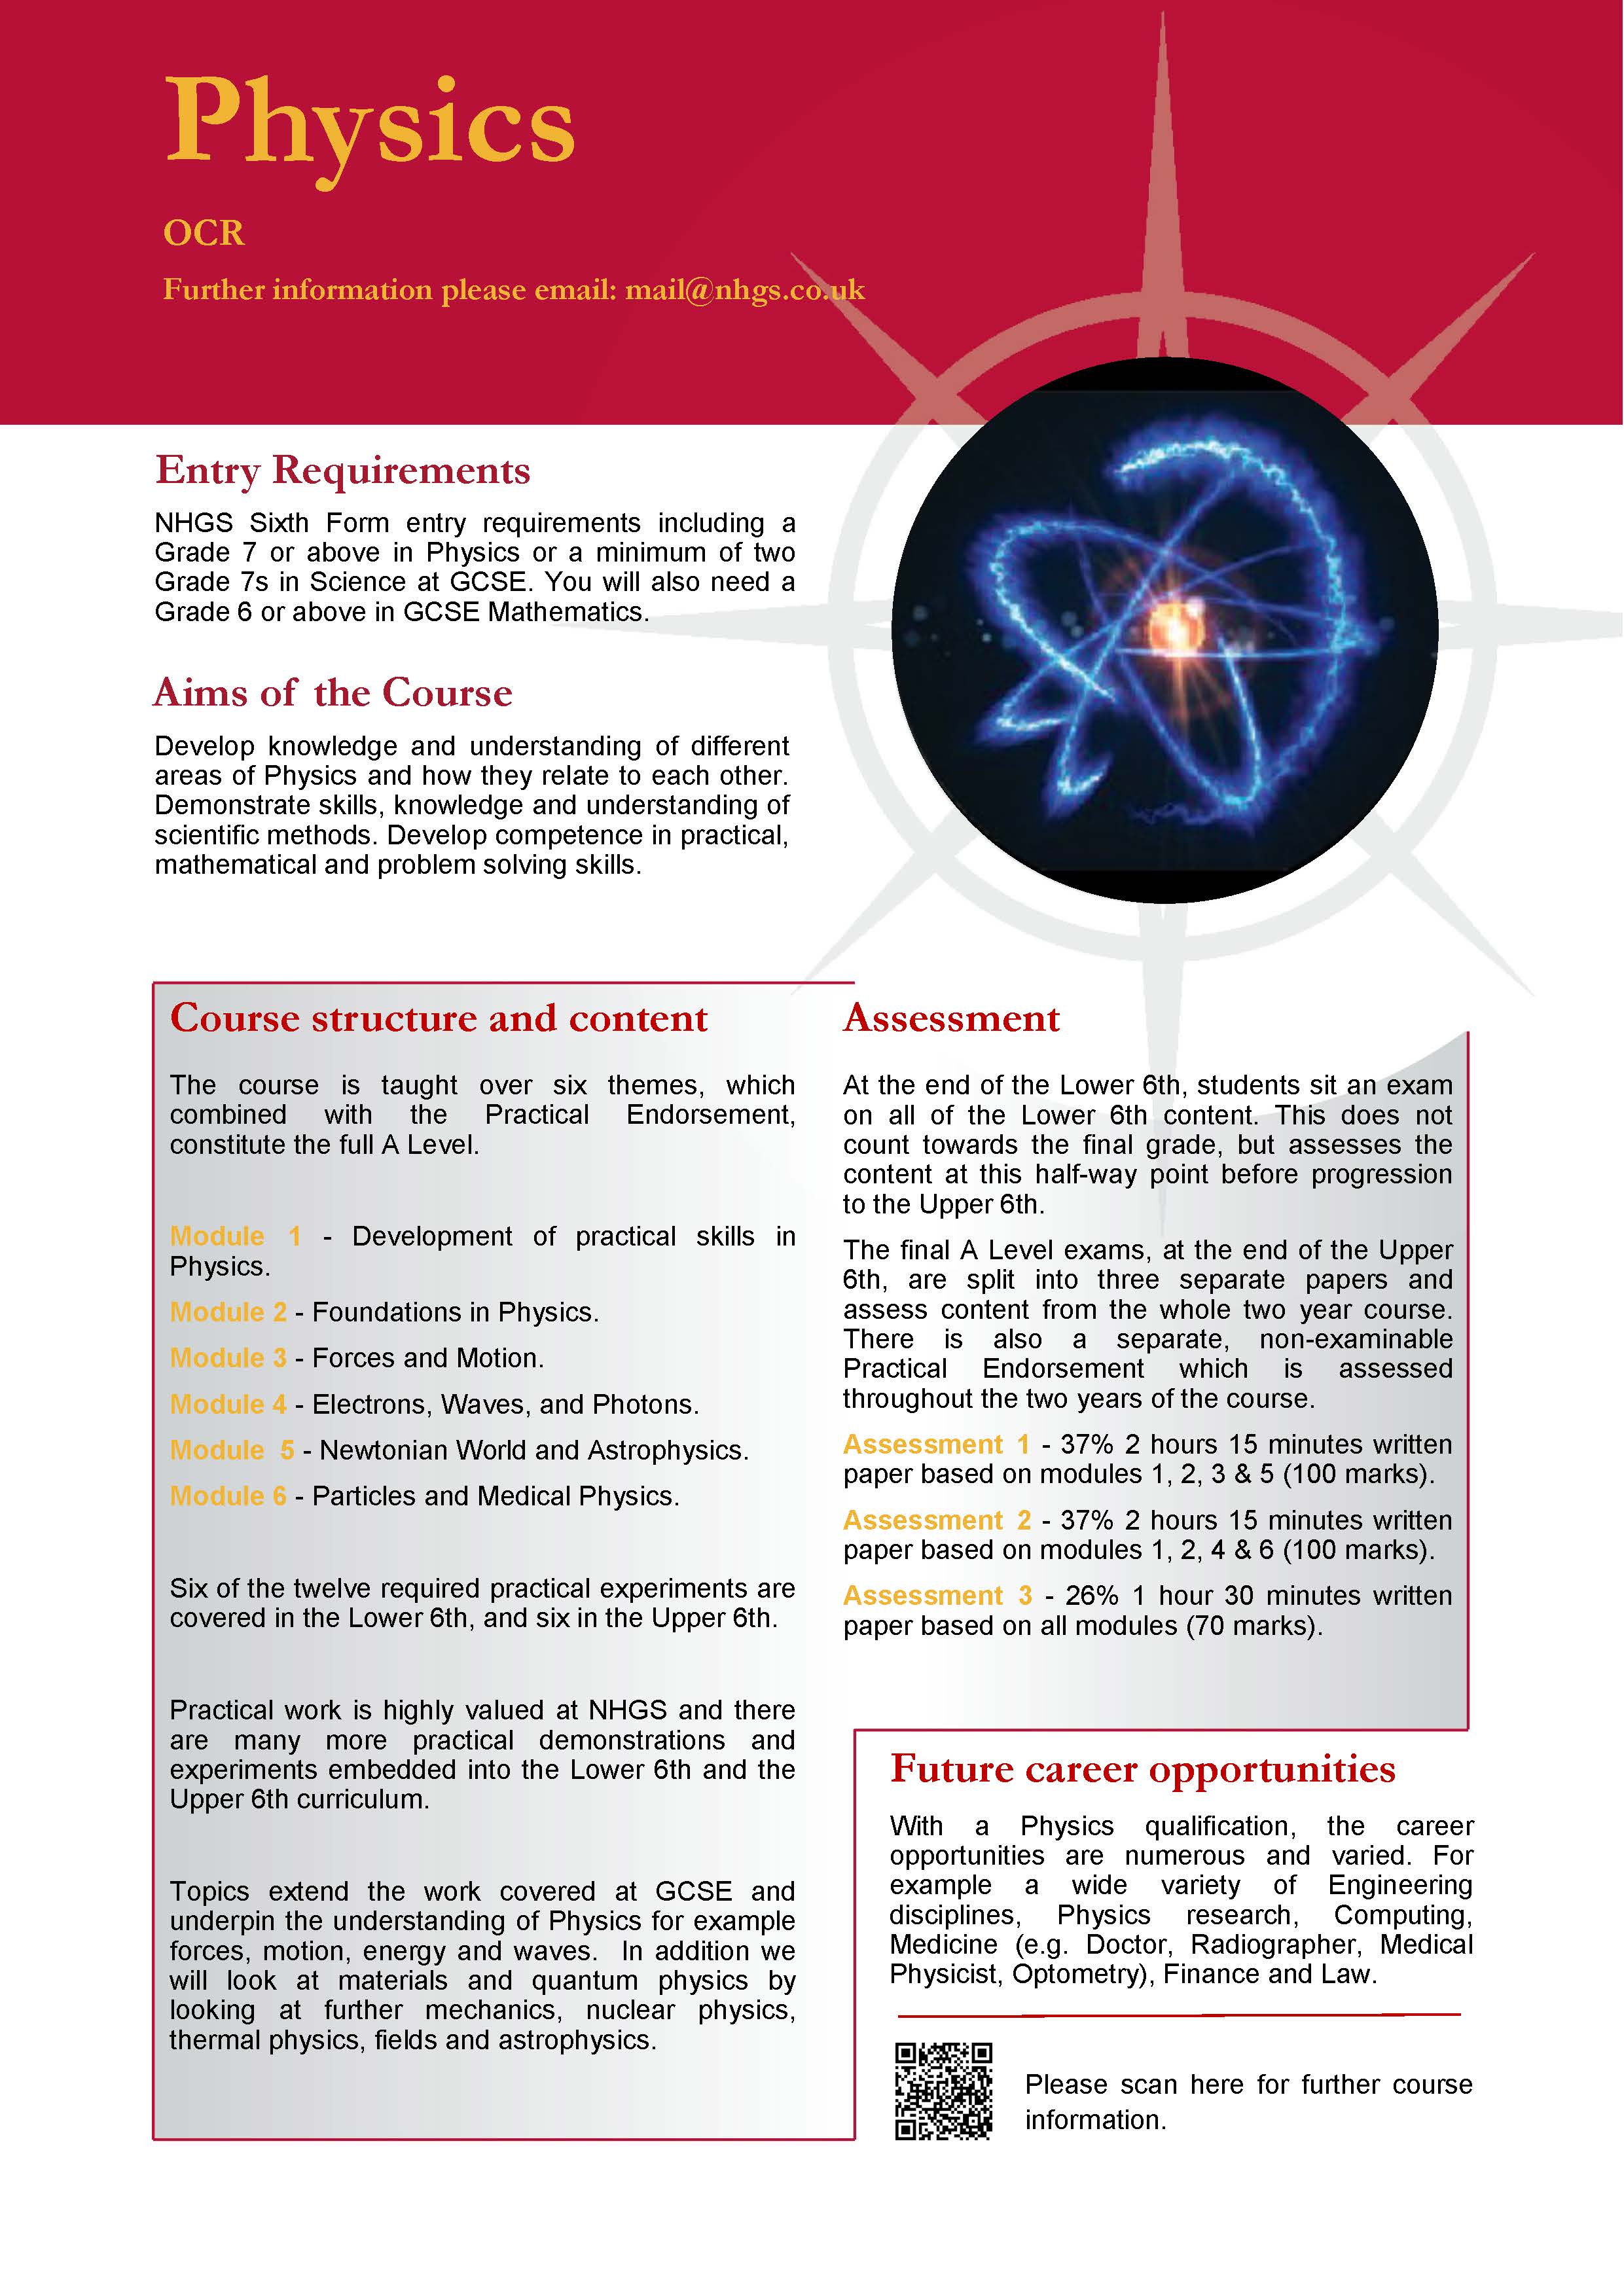 Physics A Level Course Flyer, NHGS Sixth Form